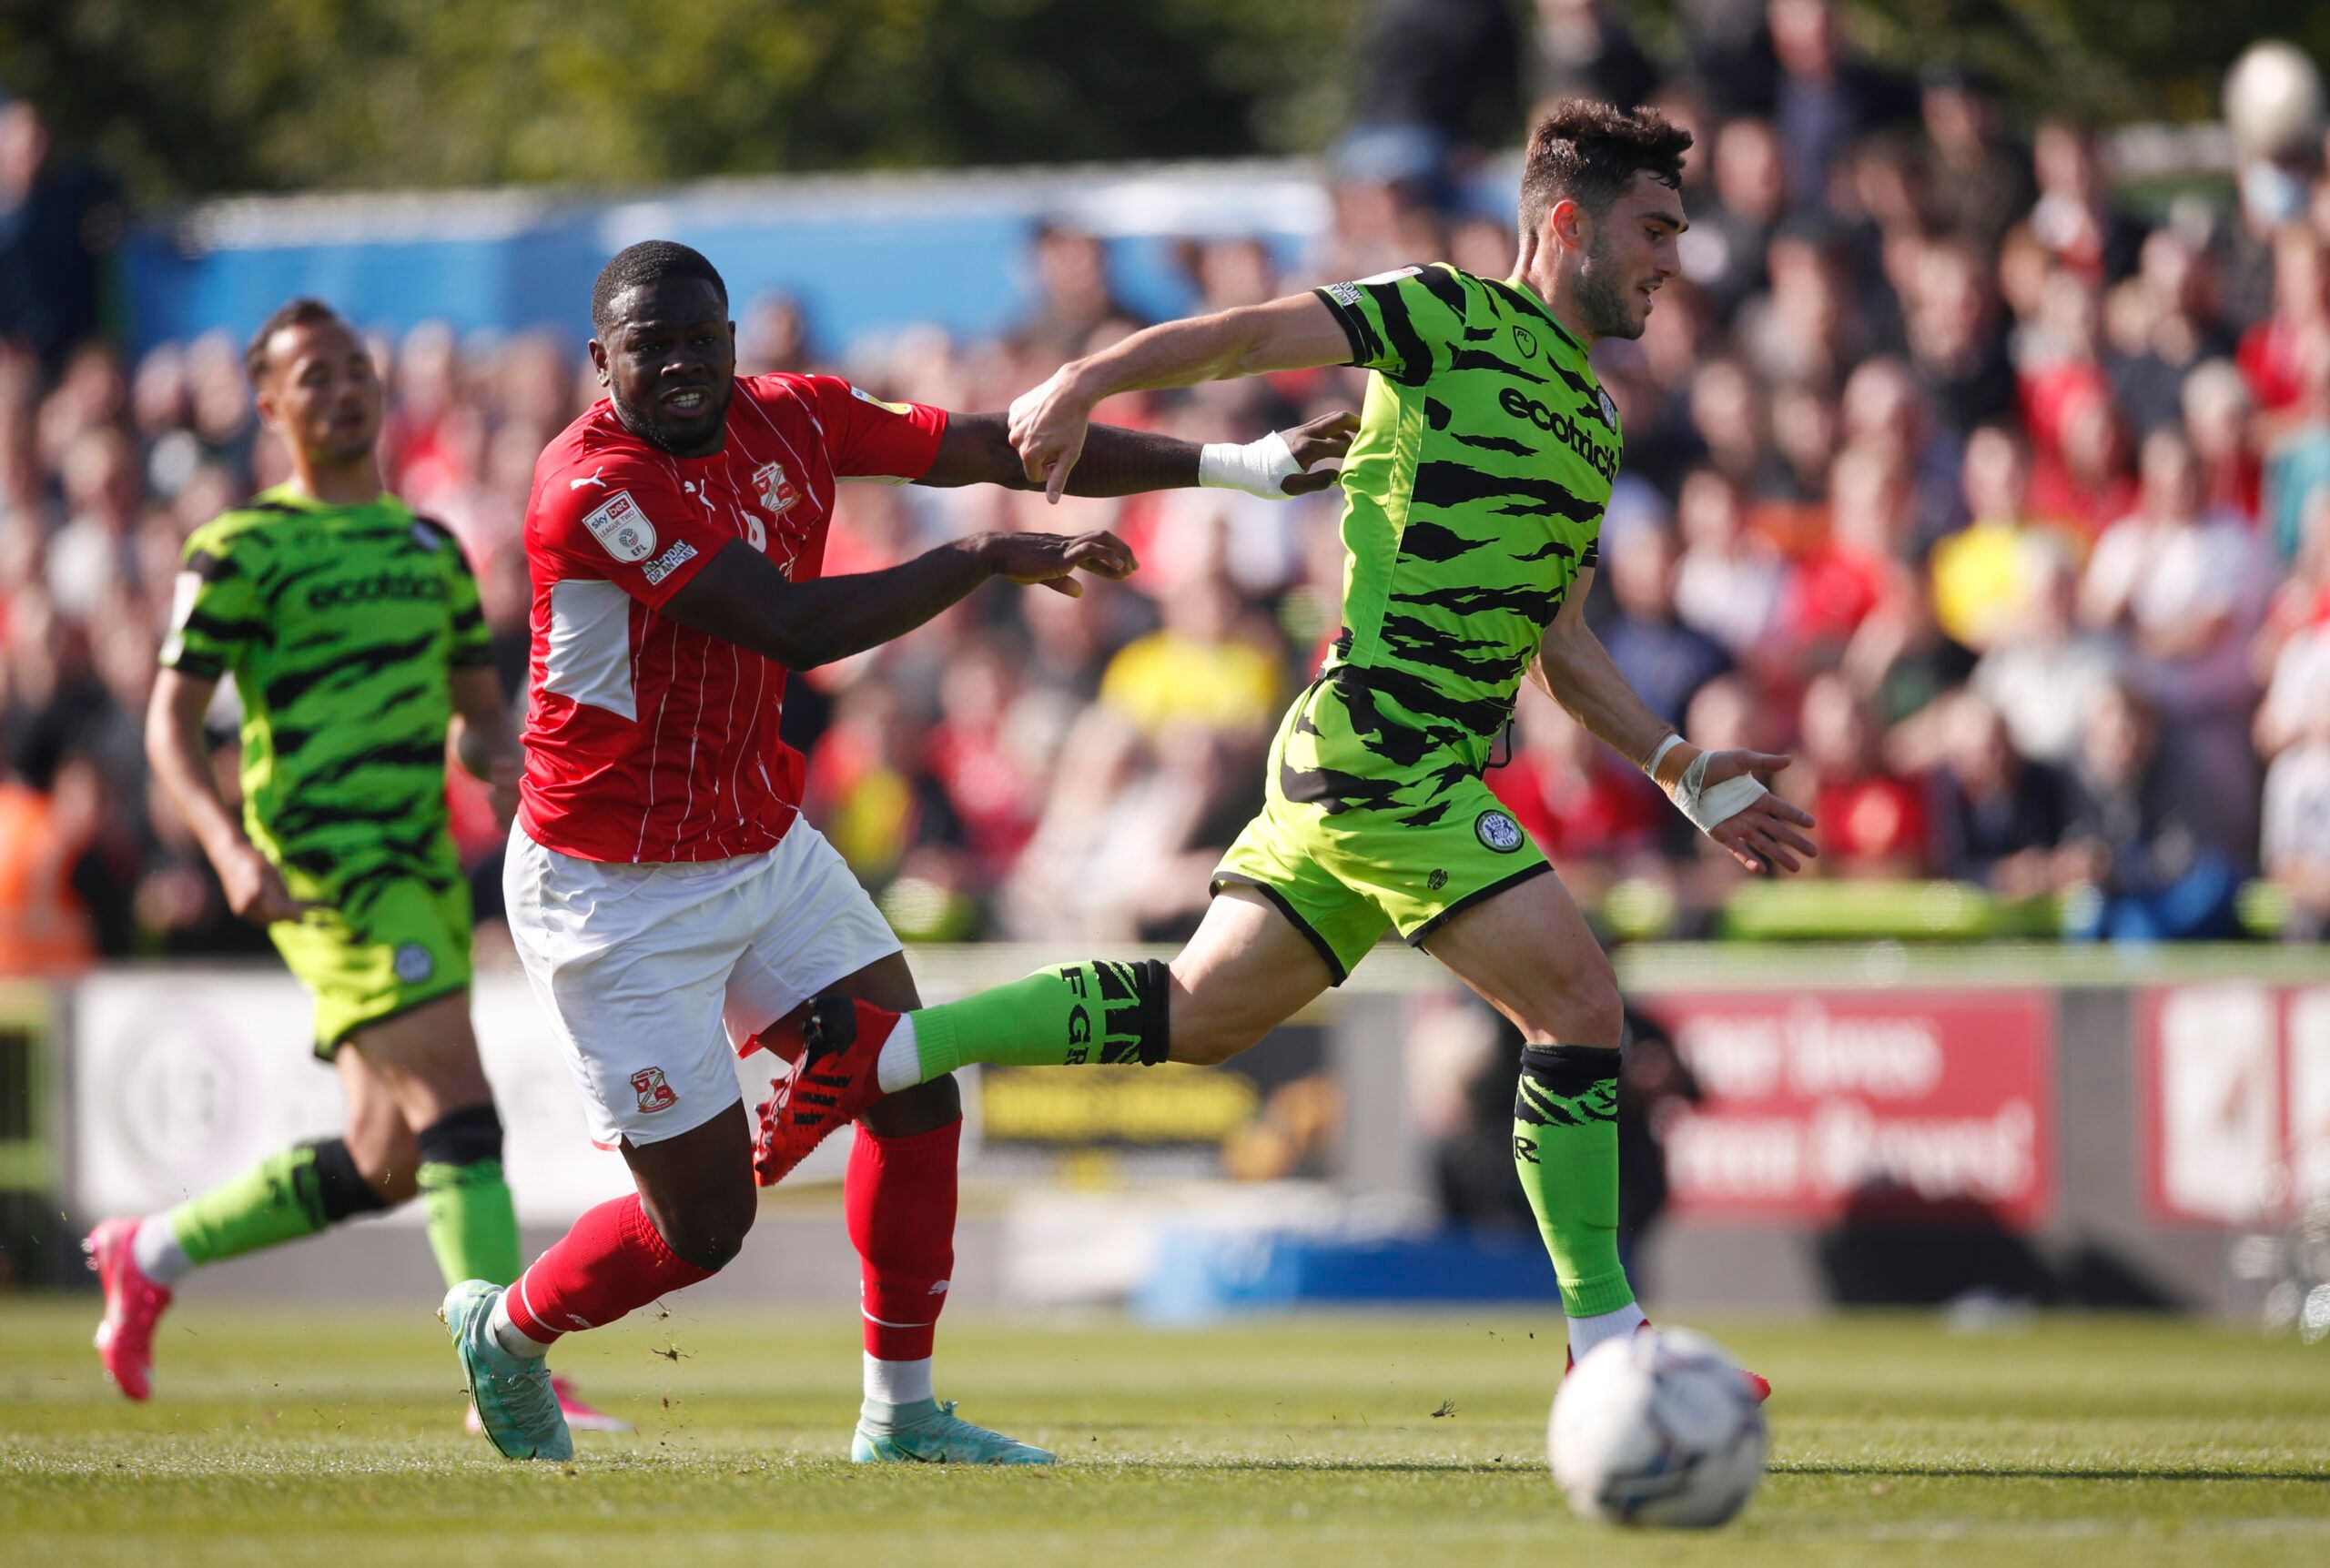 Soccer Football - League Two - Forest Green Rovers v Swindon Town - The New Lawn Stadium, Nailsworth, Britain - October 9, 2021 Forest Green Rovers’ Jordan Moore Taylor in action with Swindon Town’s Tyreece Simpson Action Images/Matthew Childs EDITORIAL USE ONLY. No use with unauthorized audio, video, data, fixture lists, club/league logos or 'live' services. Online in-match use limited to 75 images, no video emulation. No use in betting, games or single club /league/player publications.  Please